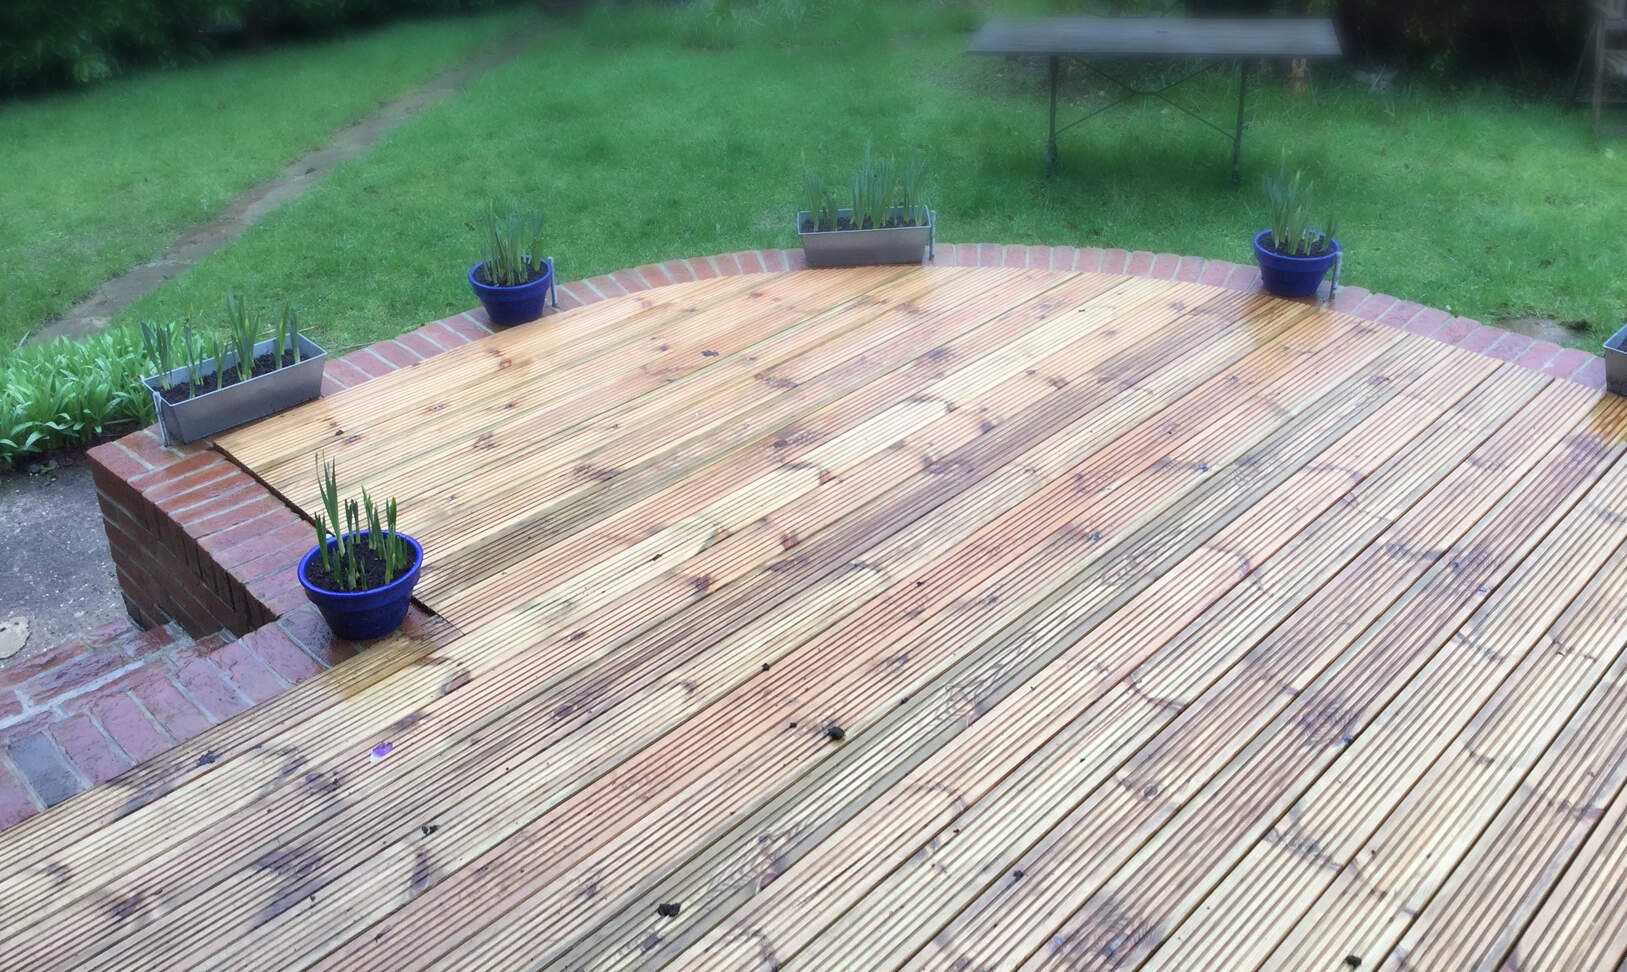 Creation of a decking area with brick perimeter